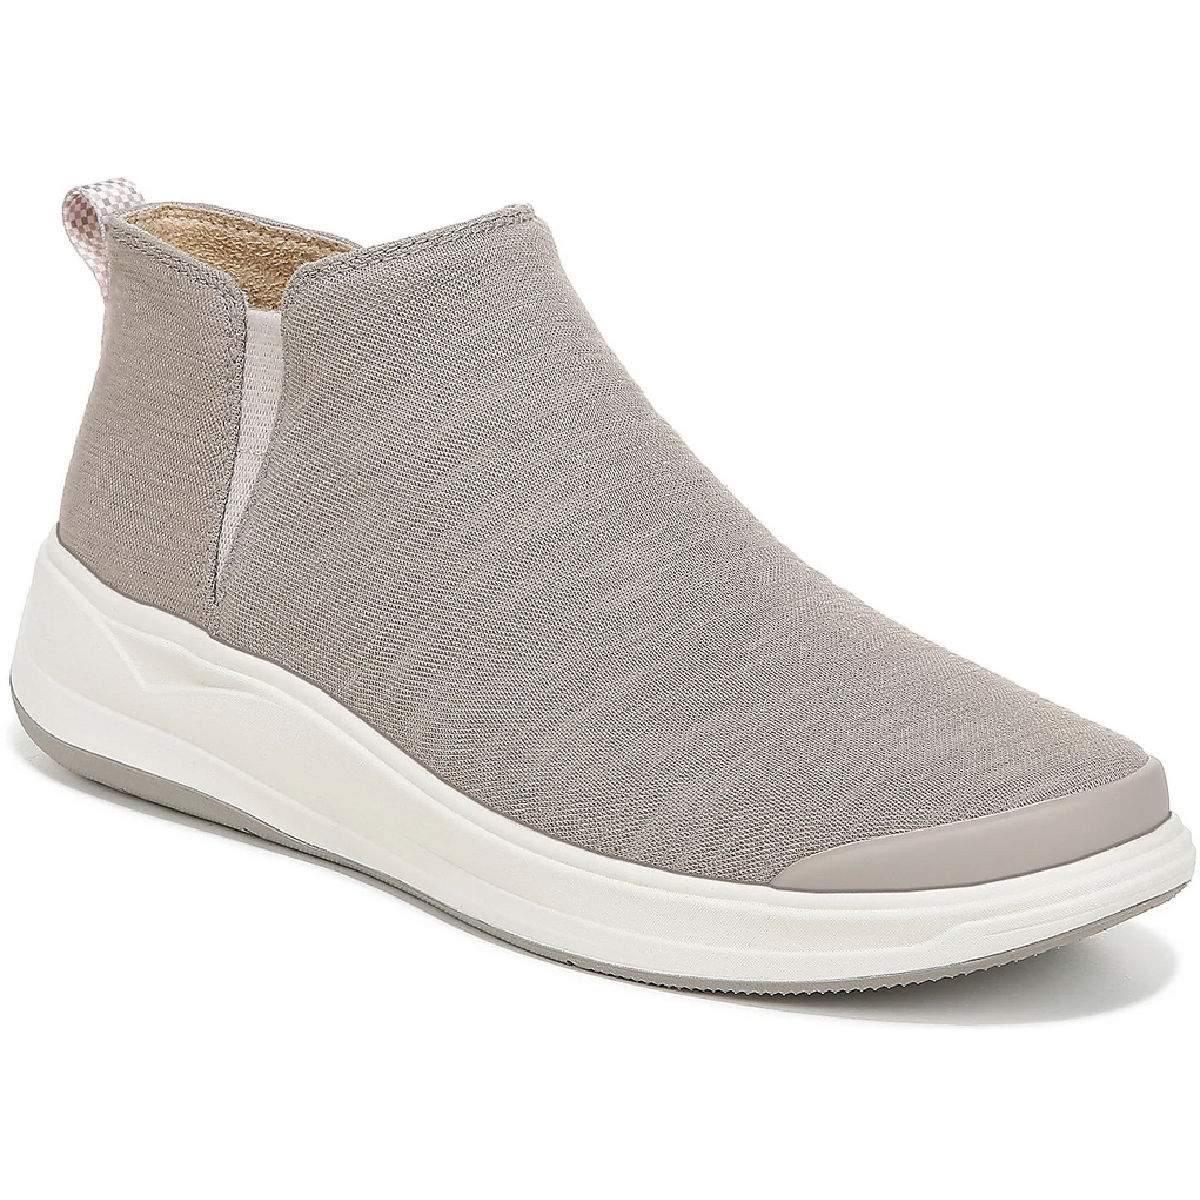 BZees Tempo Washable Slip-On Sneaker Booties